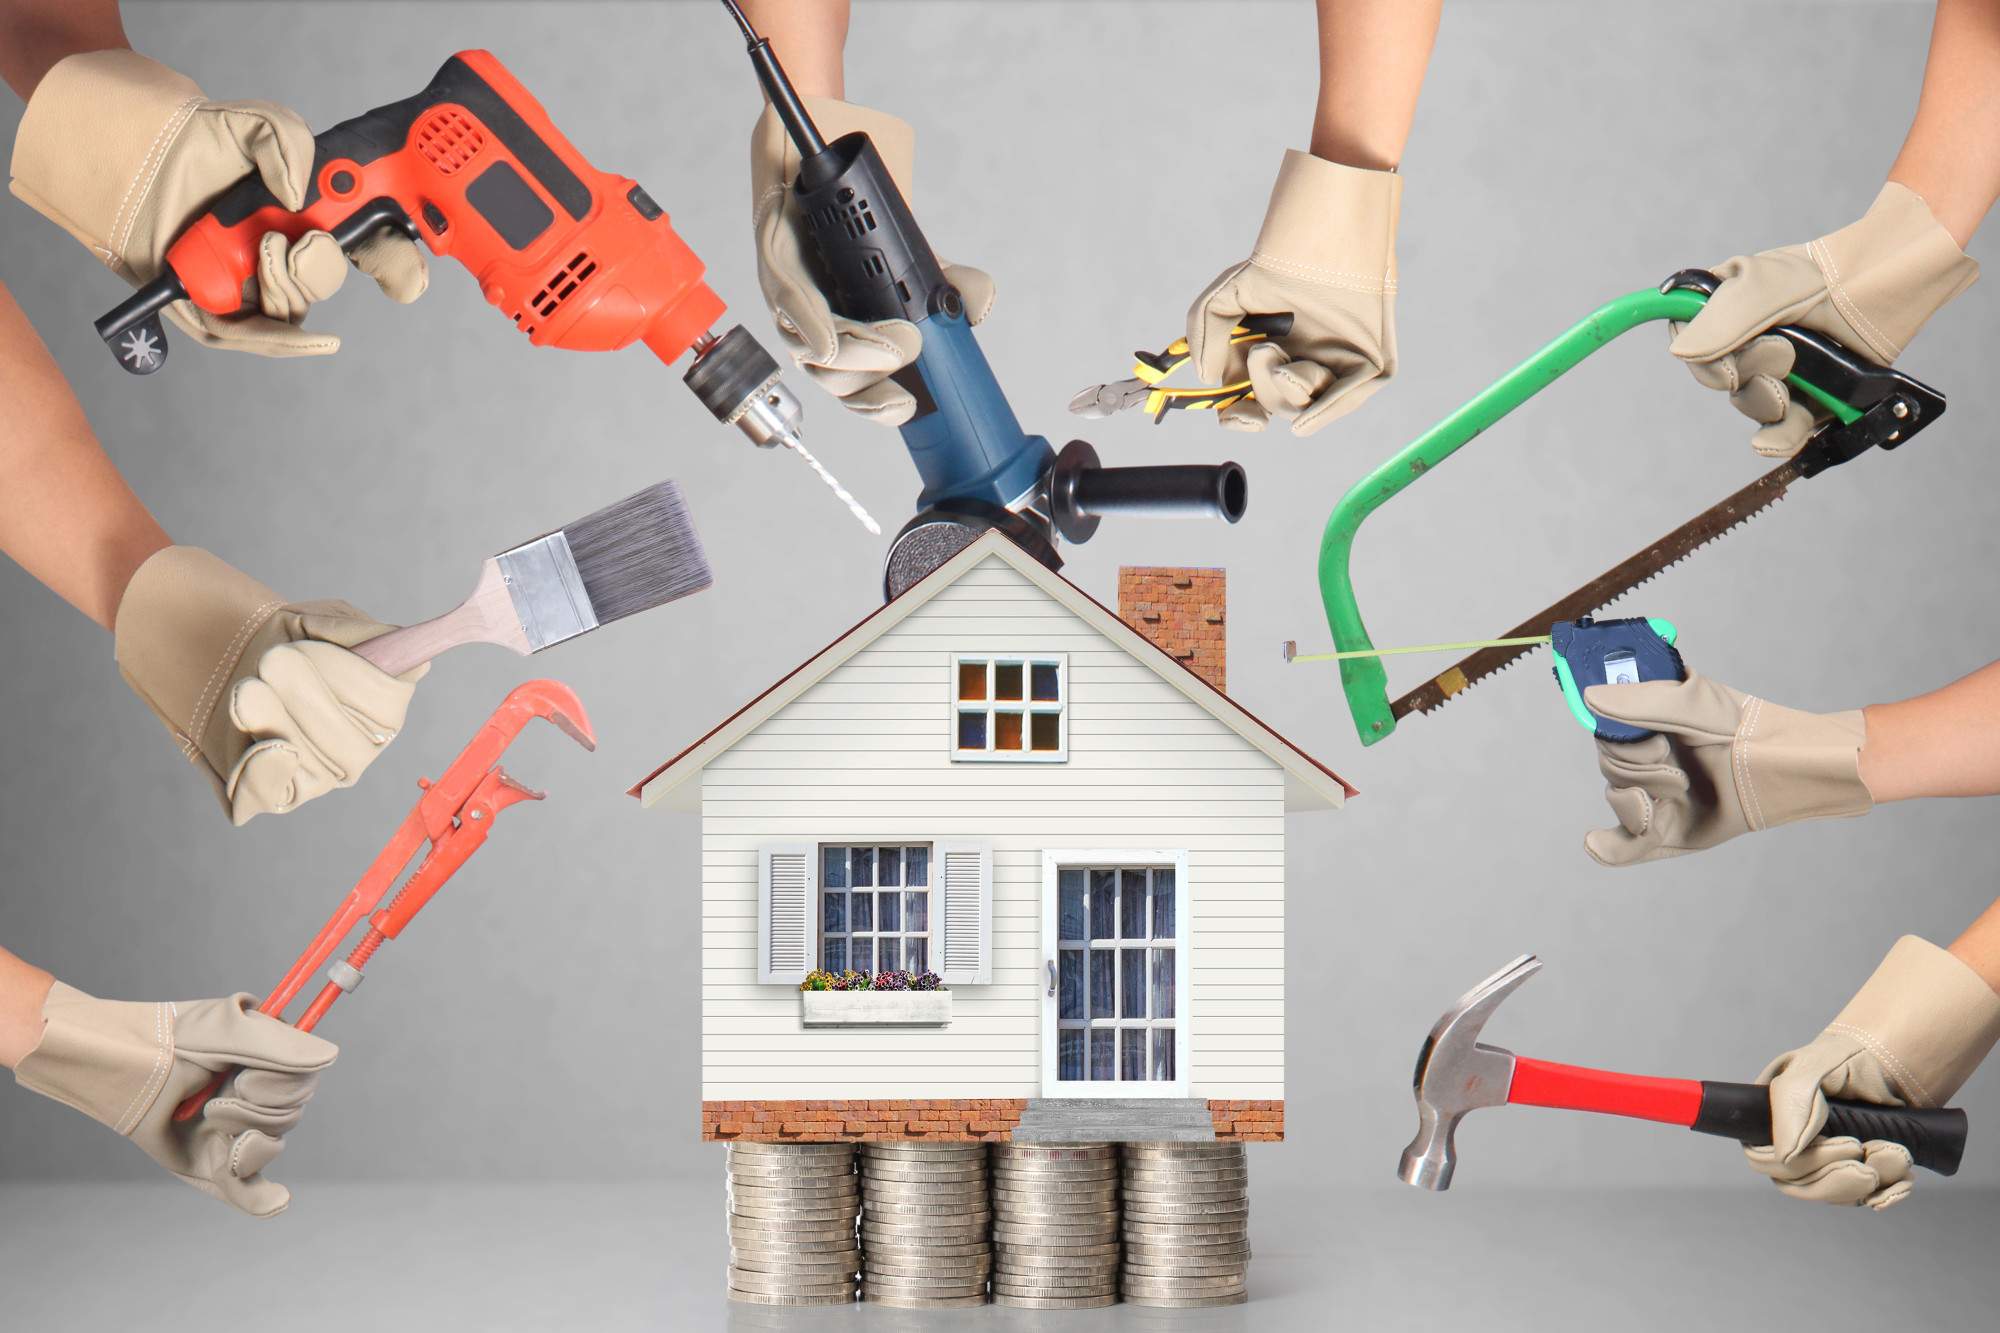 4 Home Improvement Projects to Add Value and Style to Your Property